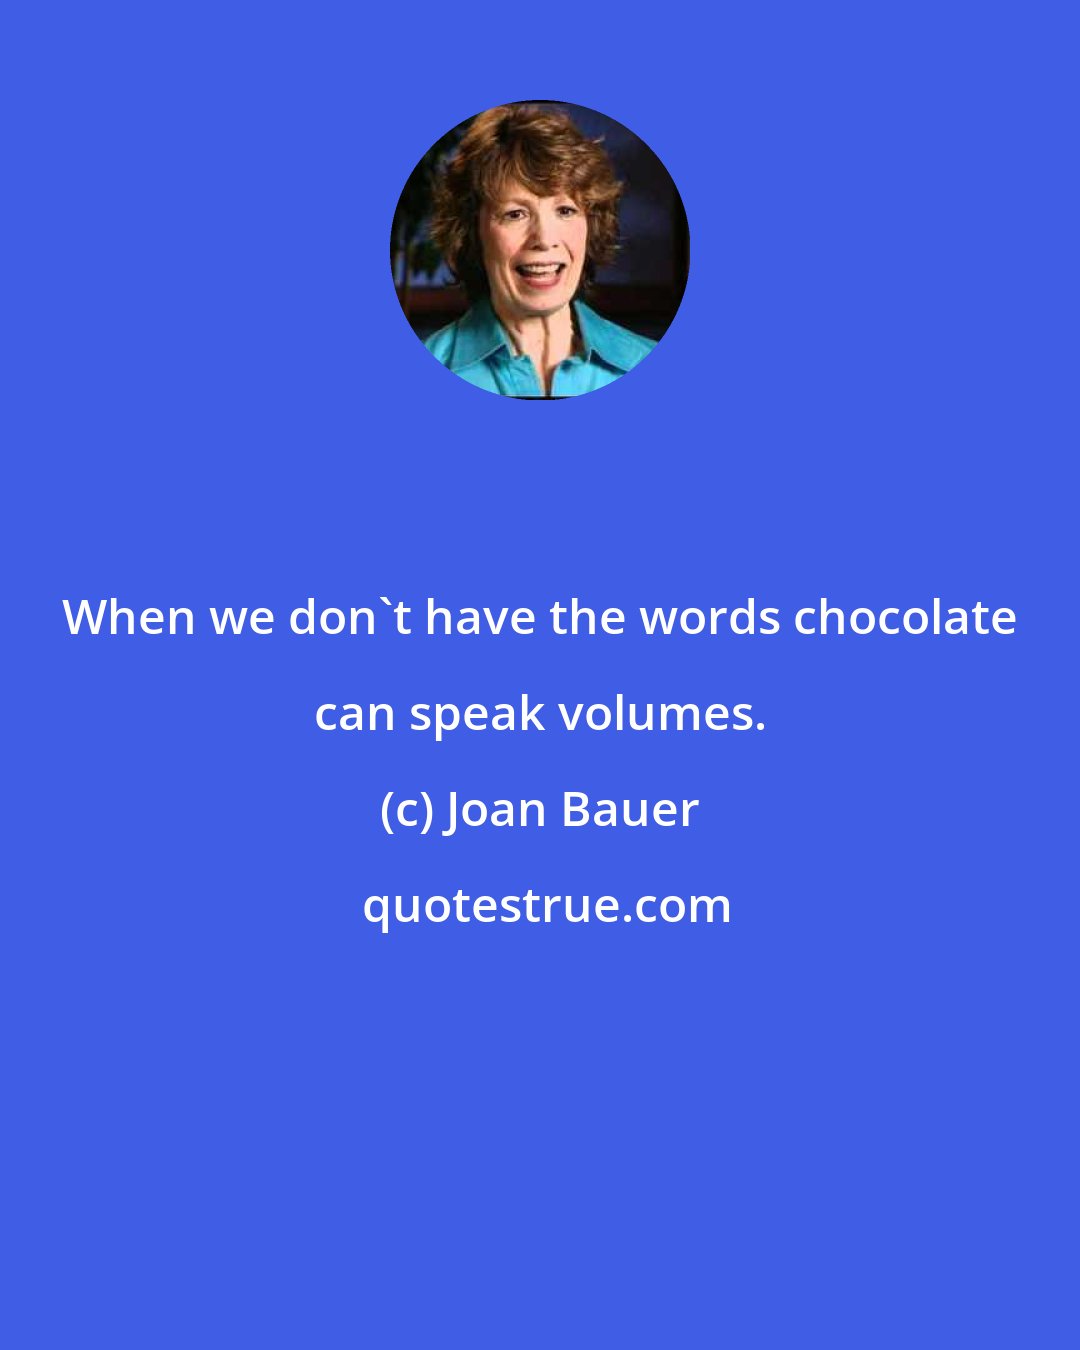 Joan Bauer: When we don't have the words chocolate can speak volumes.